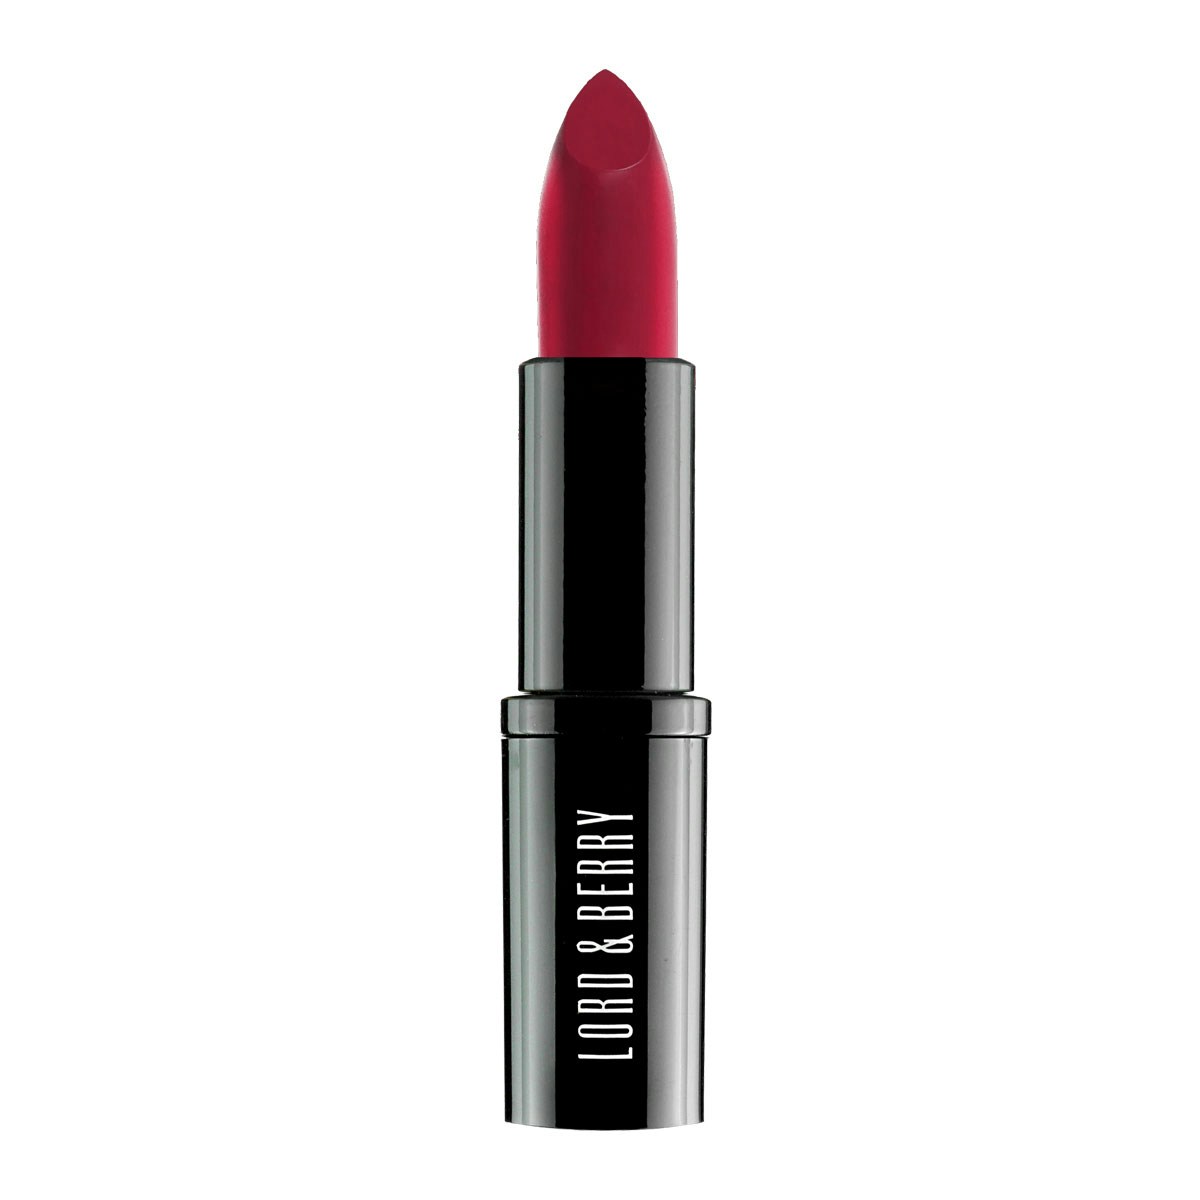 Lord & Berry Lips Lord and Berry - Vogue Matte Lipstick - Night and Day - 23g